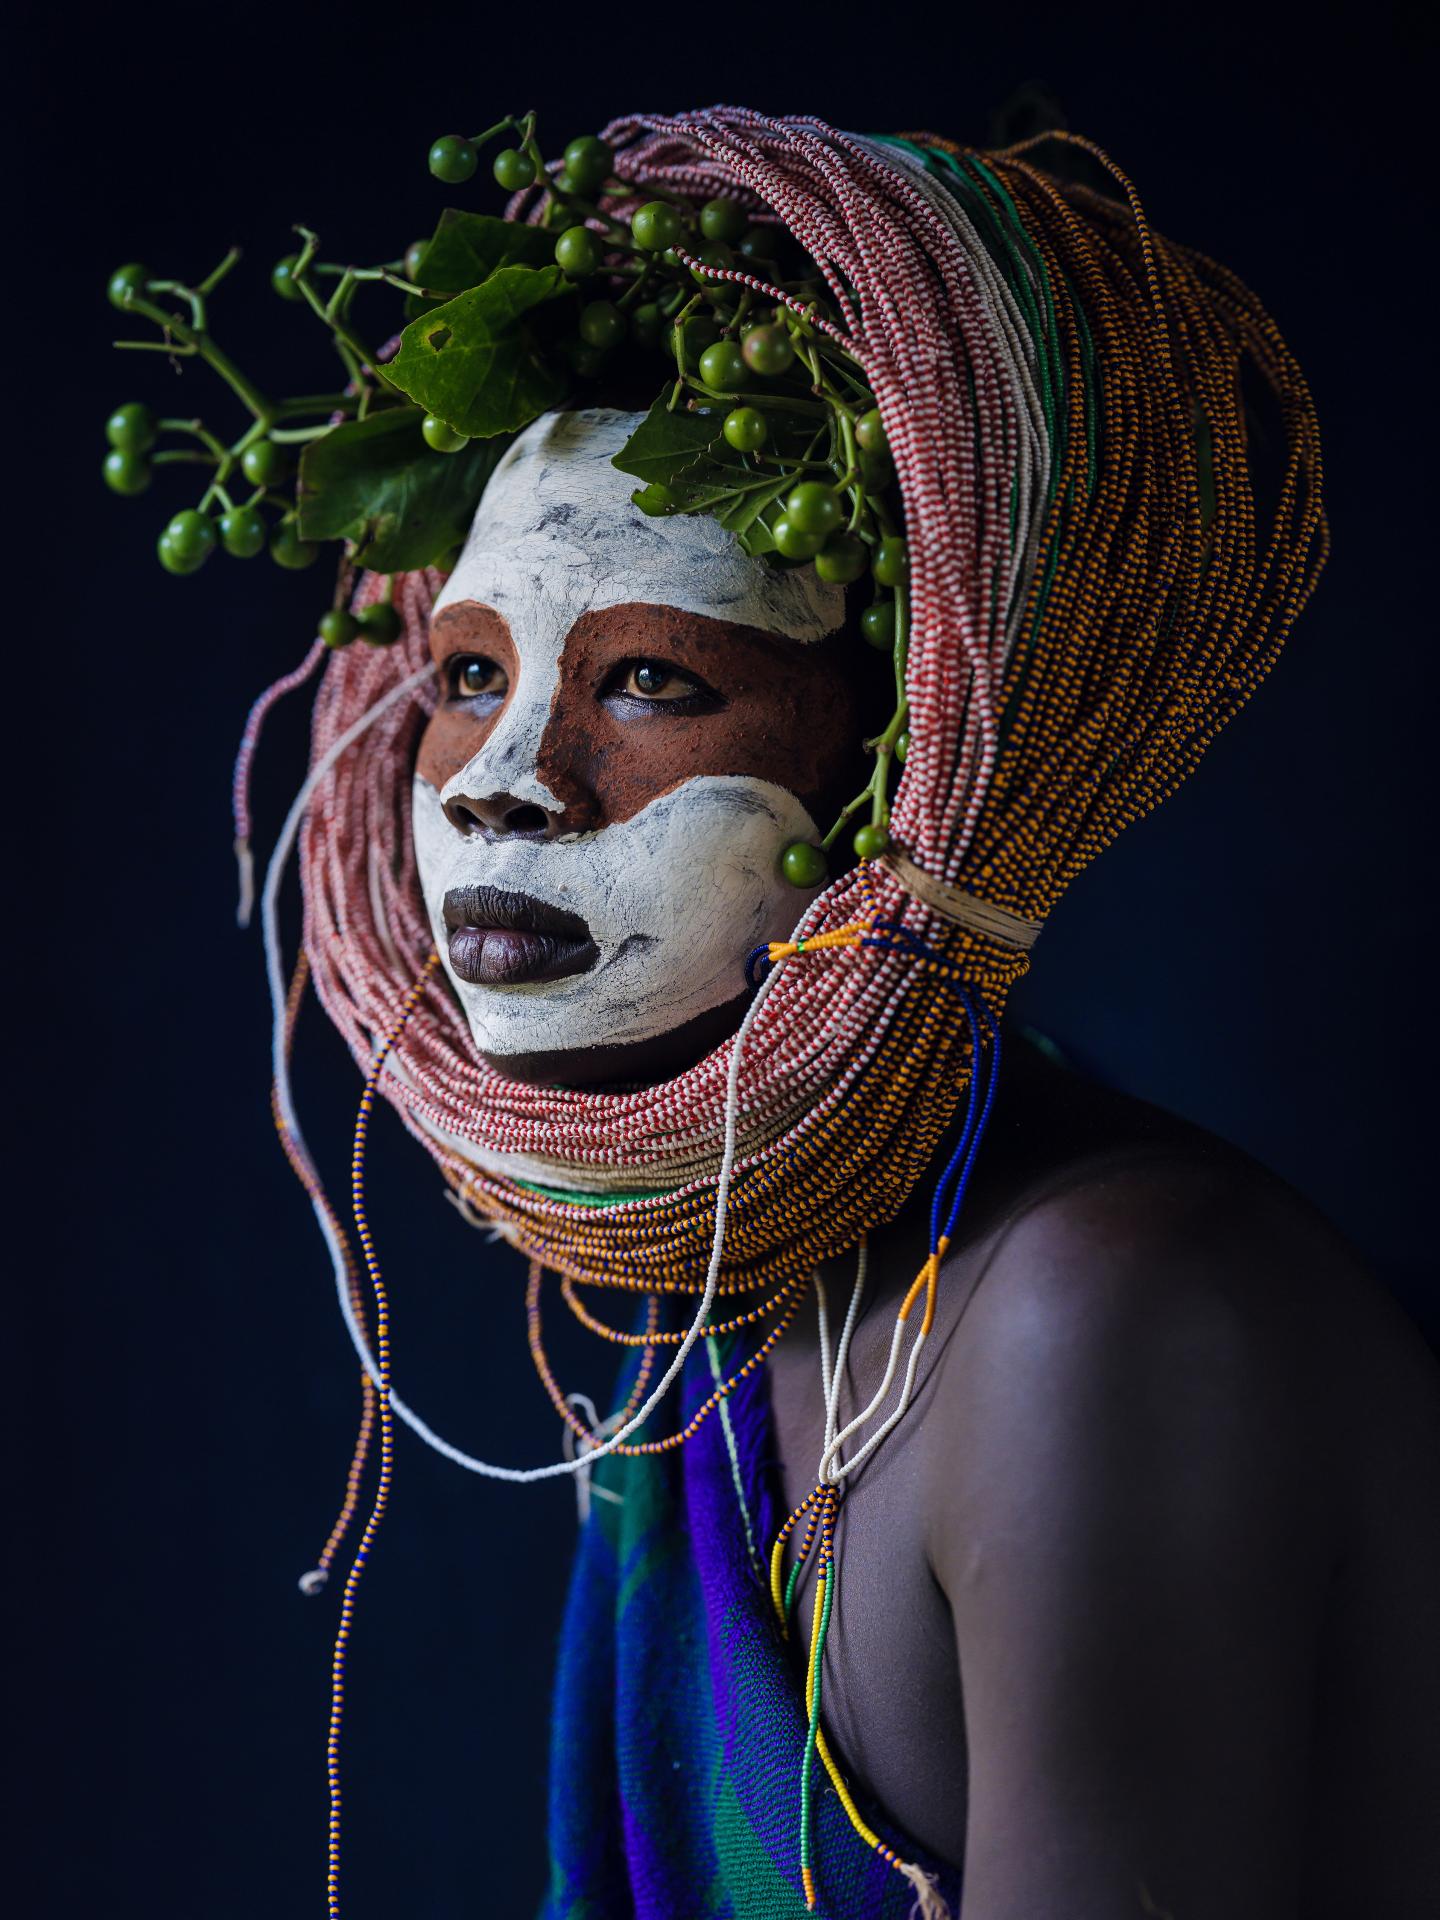 London Photography Awards Winner - Proud Woman of the Omo Valley